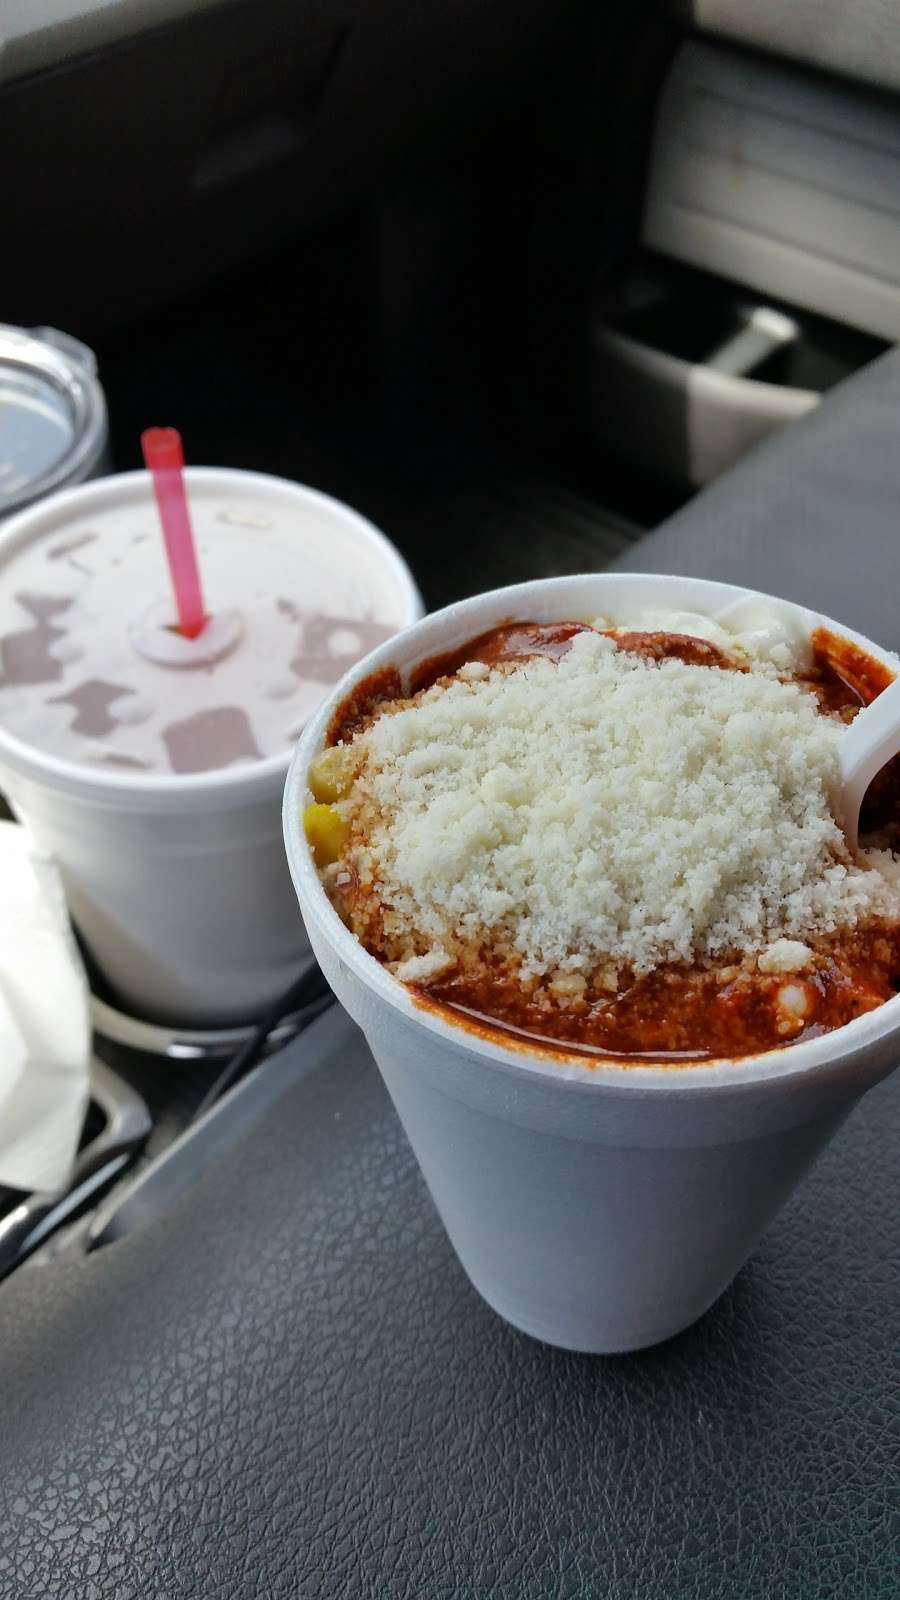 Mexican Elotes & More | 7909 Airline Dr, Houston, TX 77037